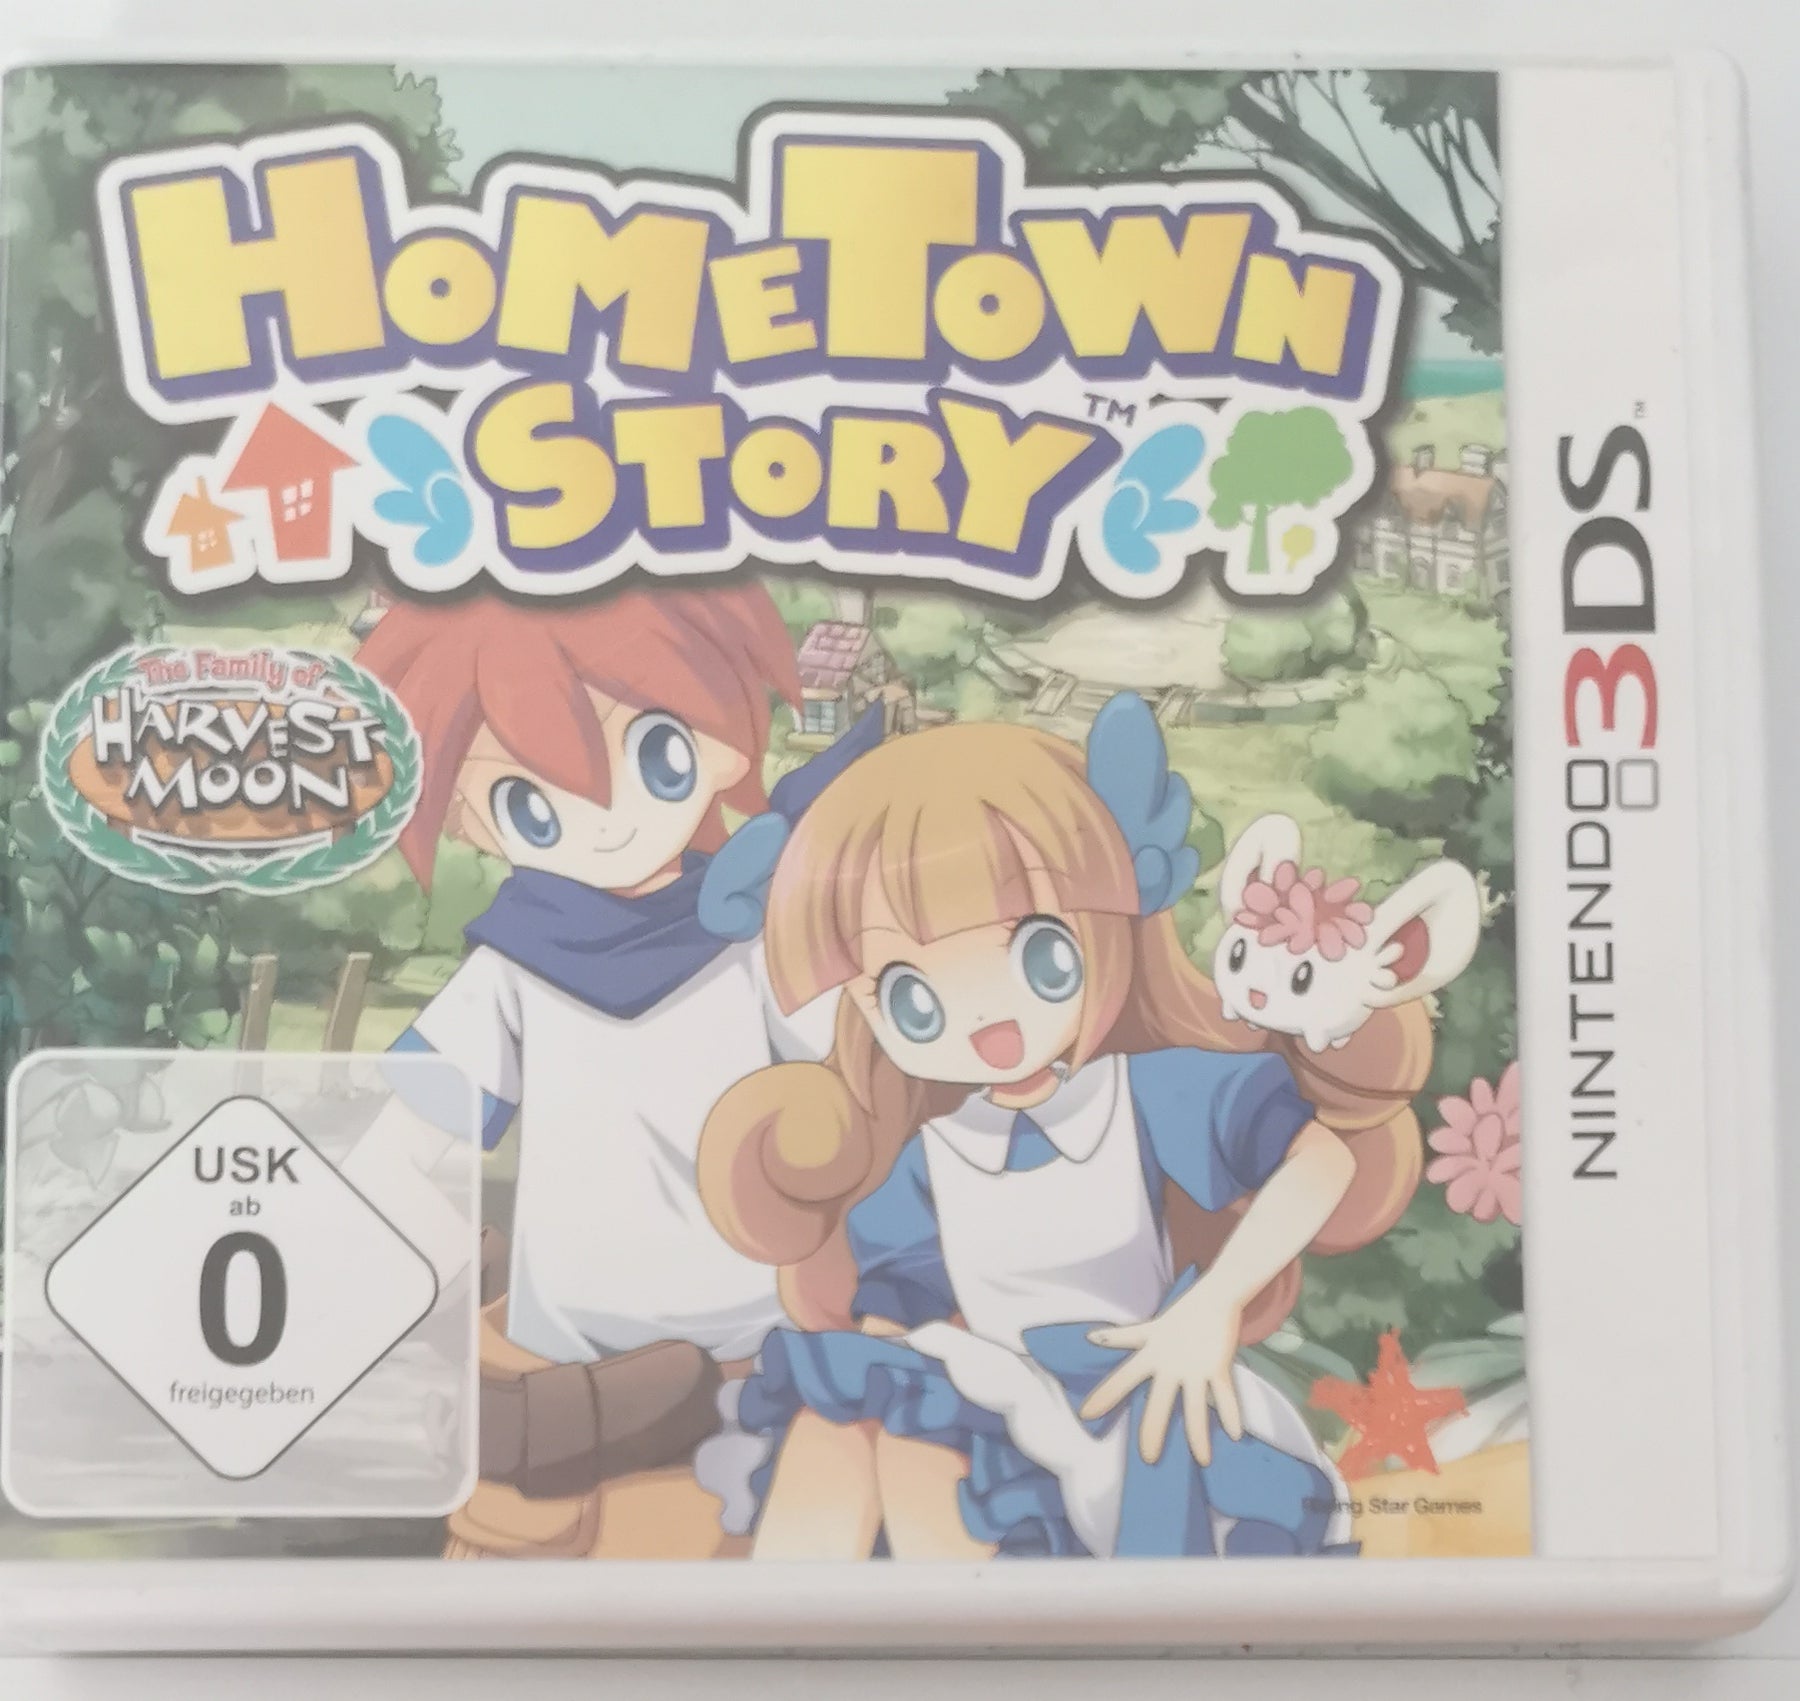 Hometown Story The Family of Harvest Moon Nintendo 3DS [Sehr Gut]